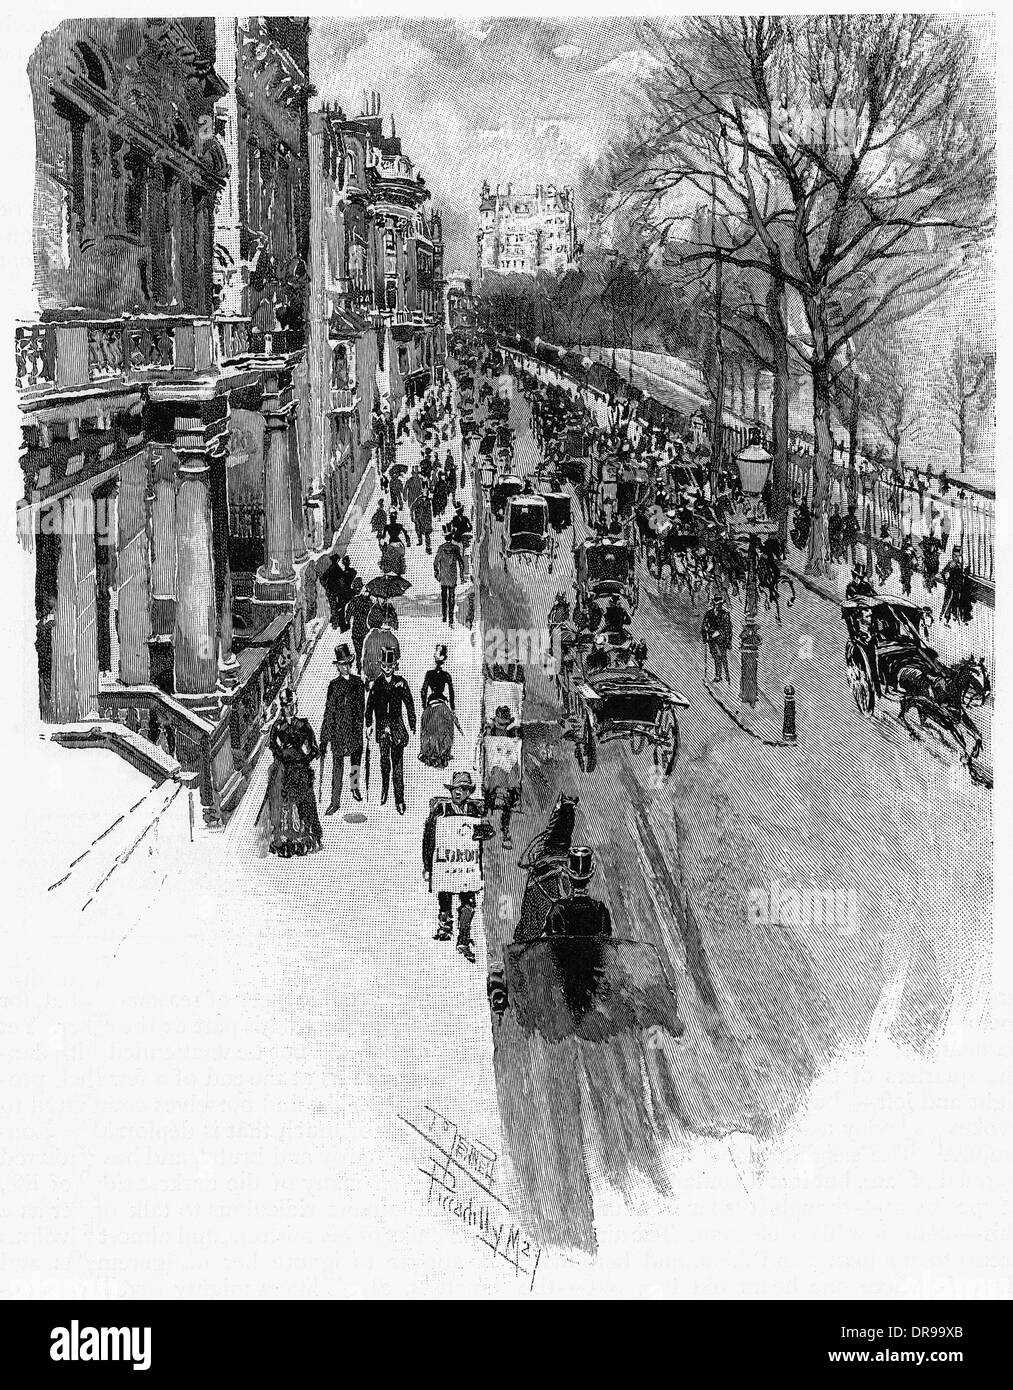 PICCADILLY, 1888 Banque D'Images